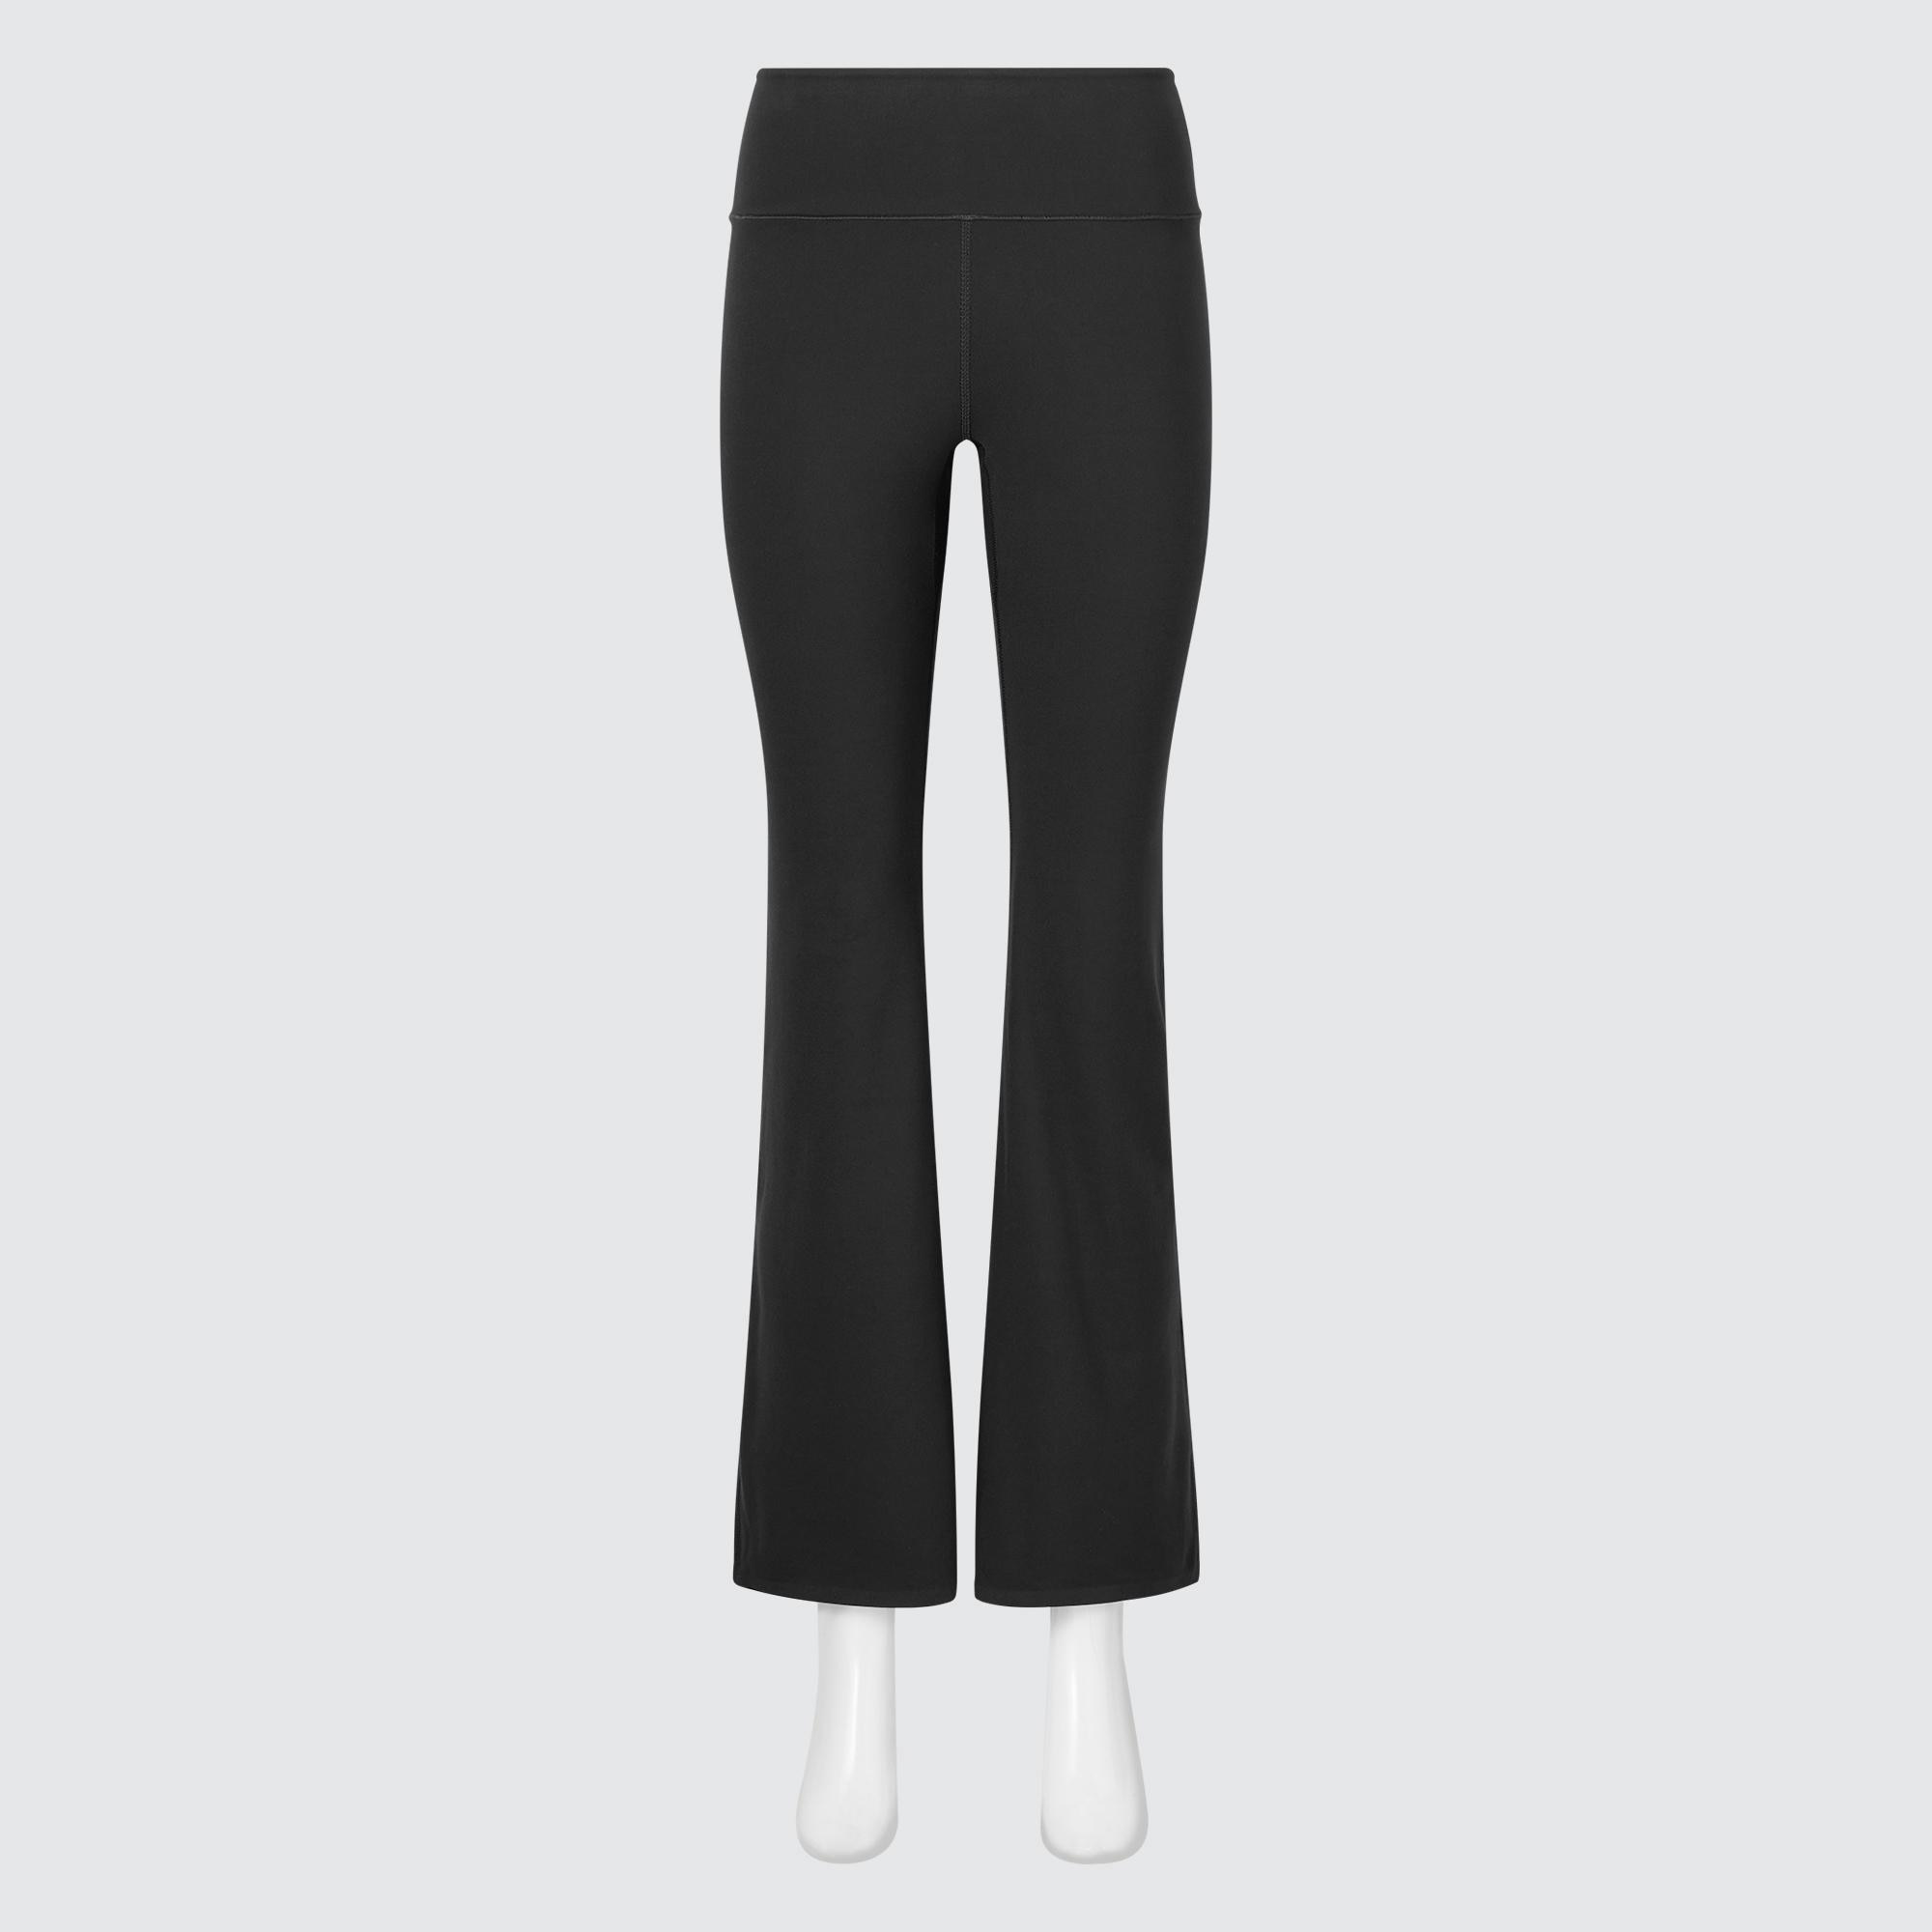 BUIgtTklOP Pants For Women Clearance Casual Temperament Solid Color Knitted  Micro Pull Slim Flare Trousers